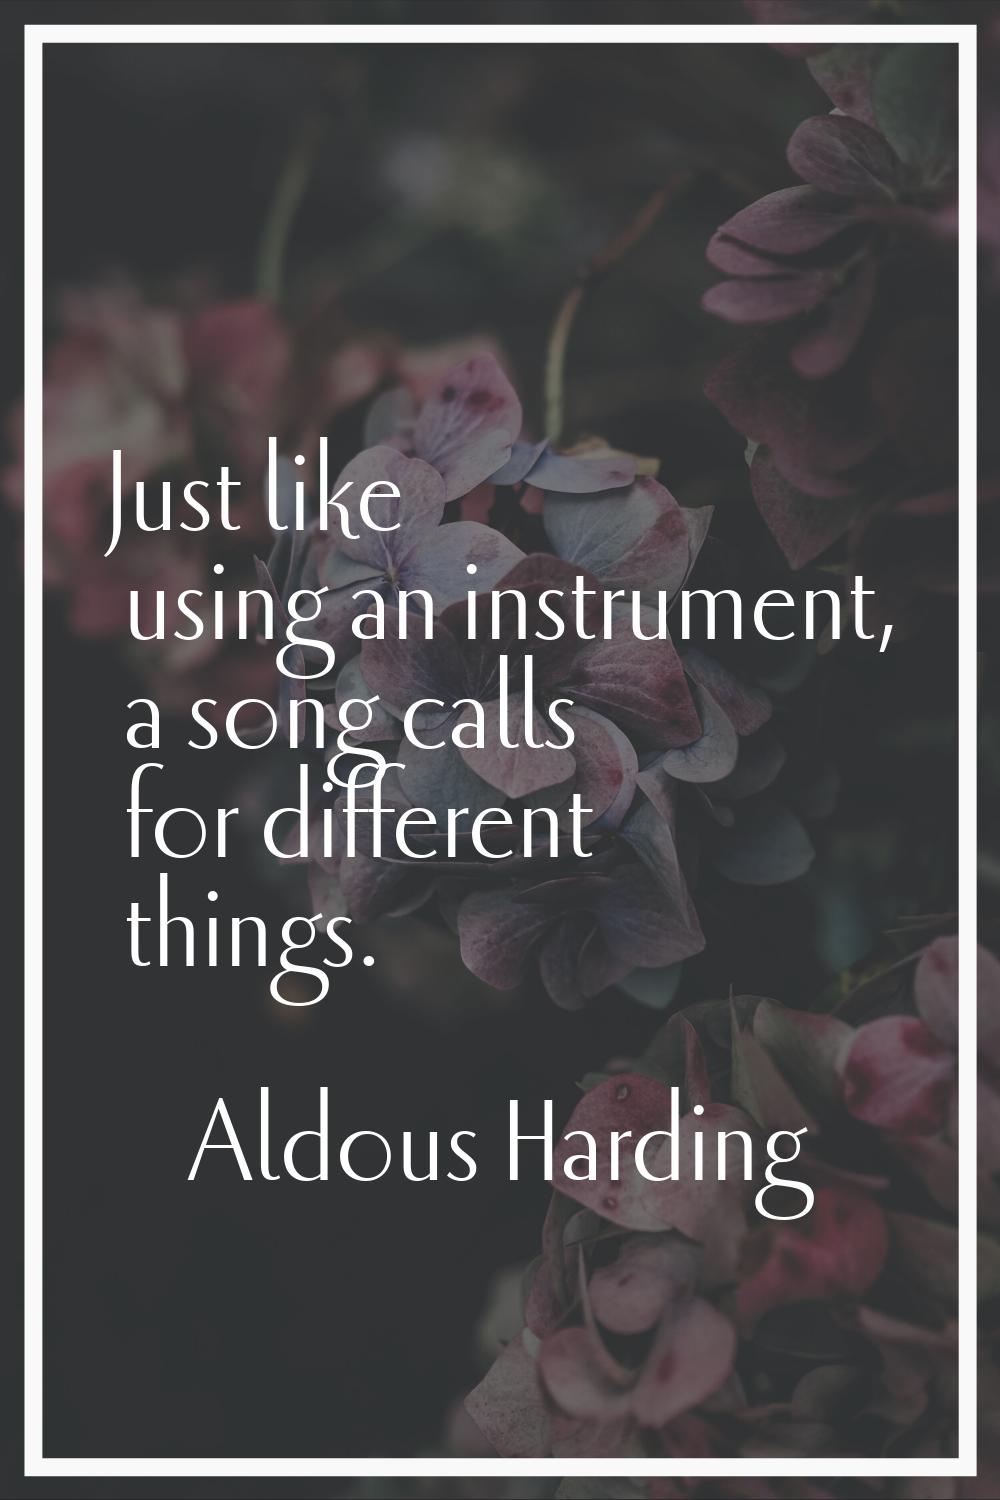 Just like using an instrument, a song calls for different things.